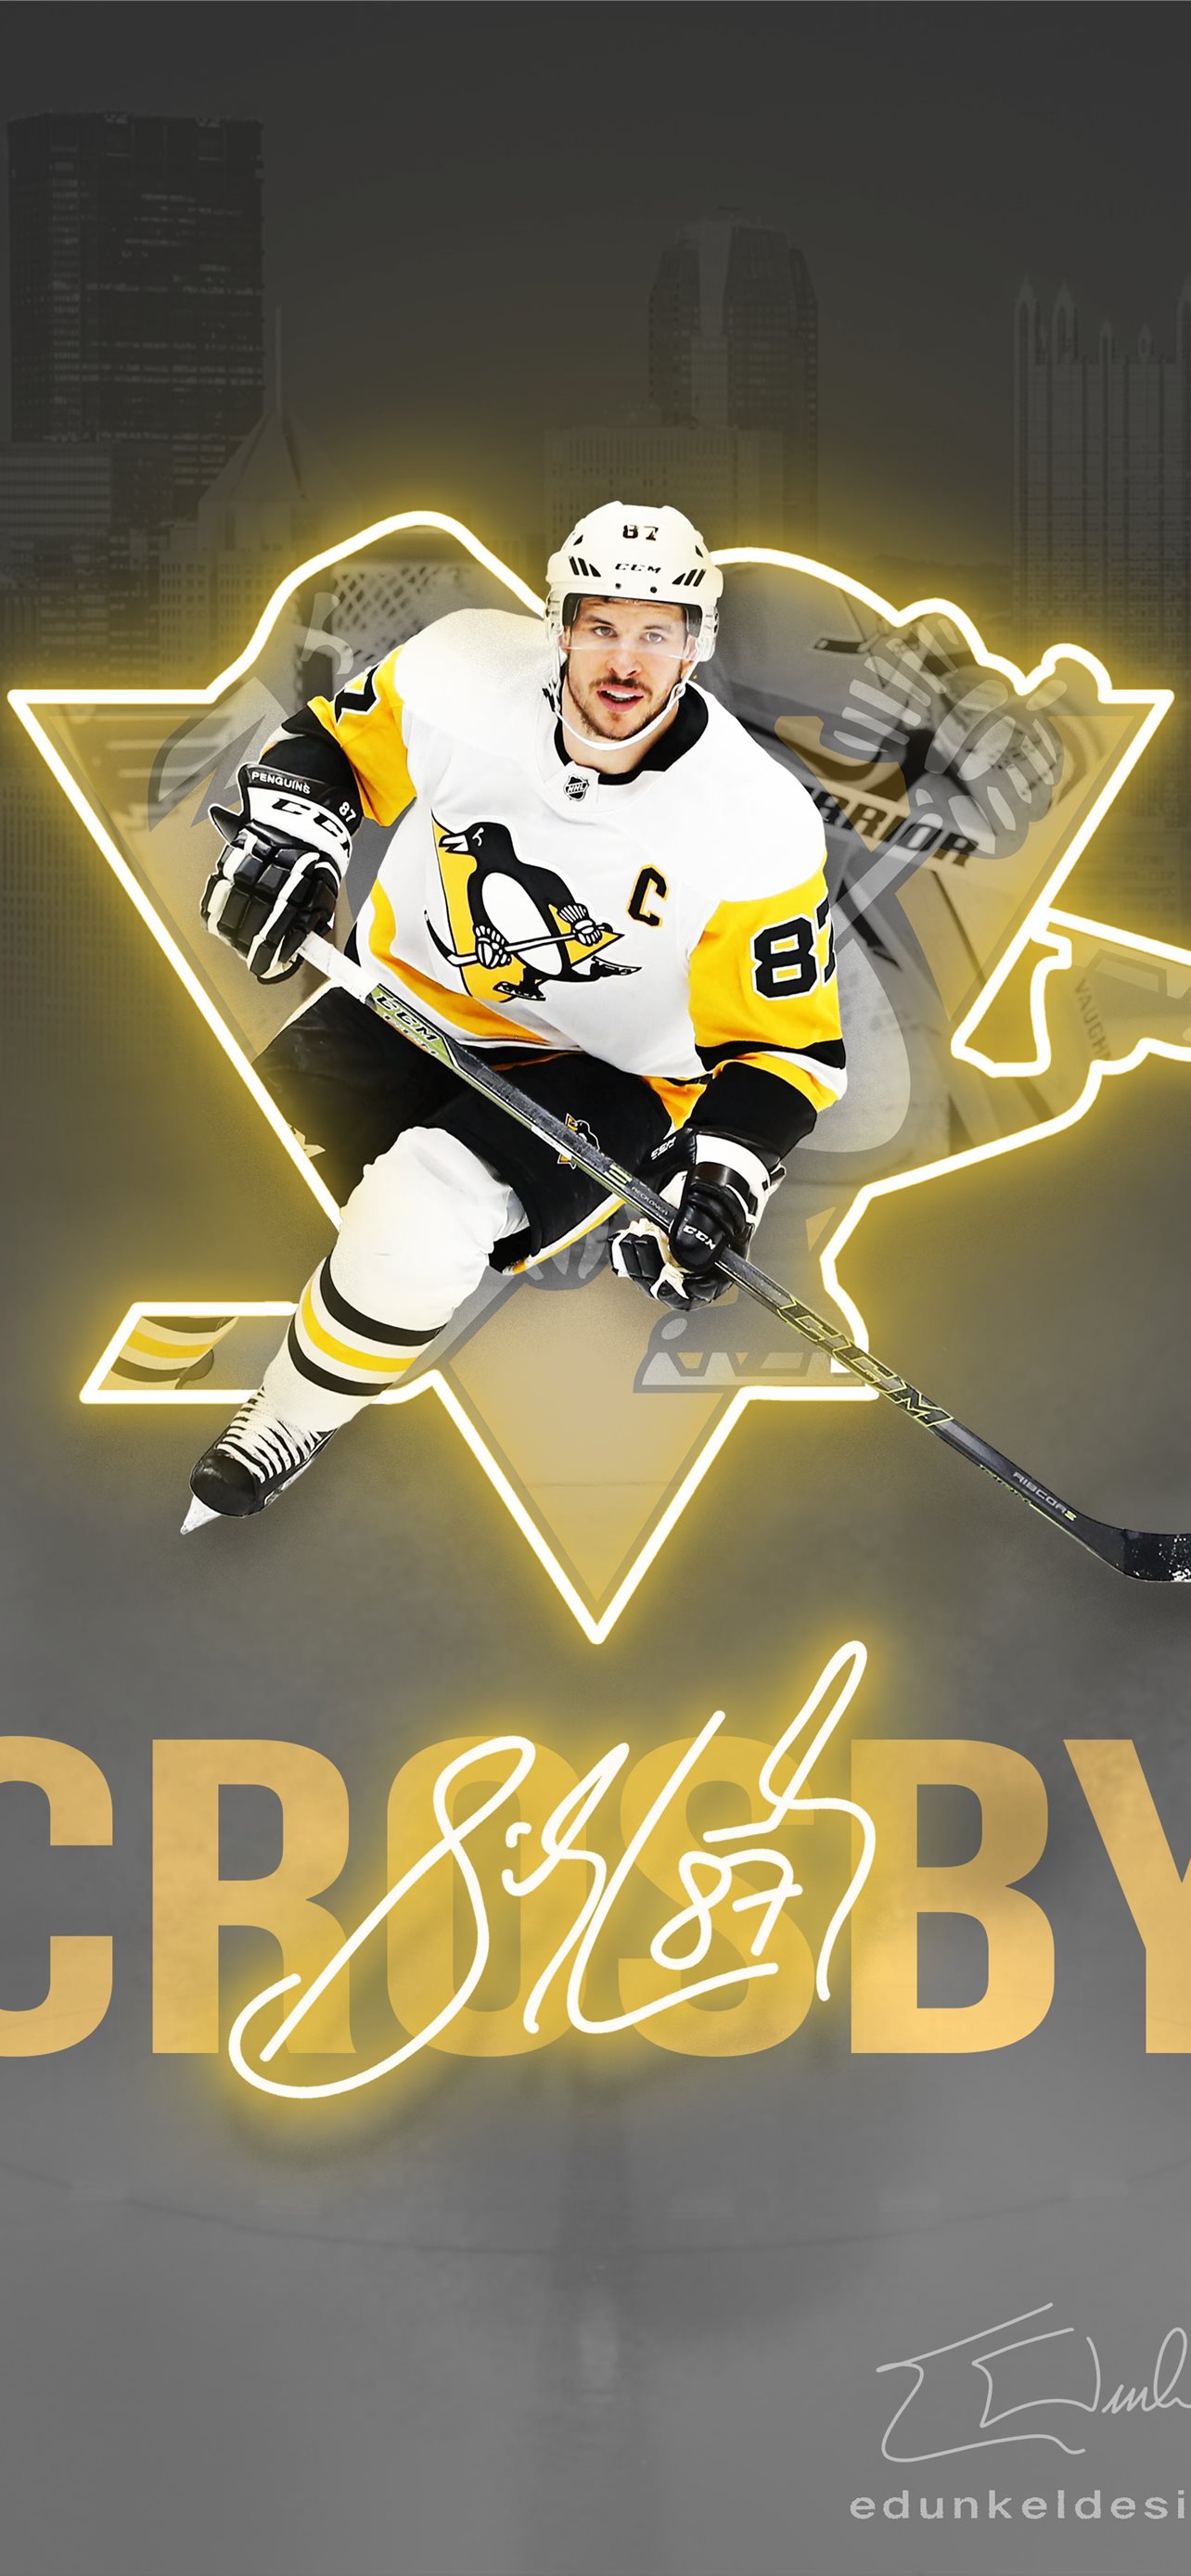 Pittsburgh Penguins on Twitter Happy Wallpaper Wednesday Pens fans  Make sure your phone is ready with the March schedule or another awesome Penguins  wallpaper httpstcoBiqqFaqWIR httpstcoWouprk8idI  X